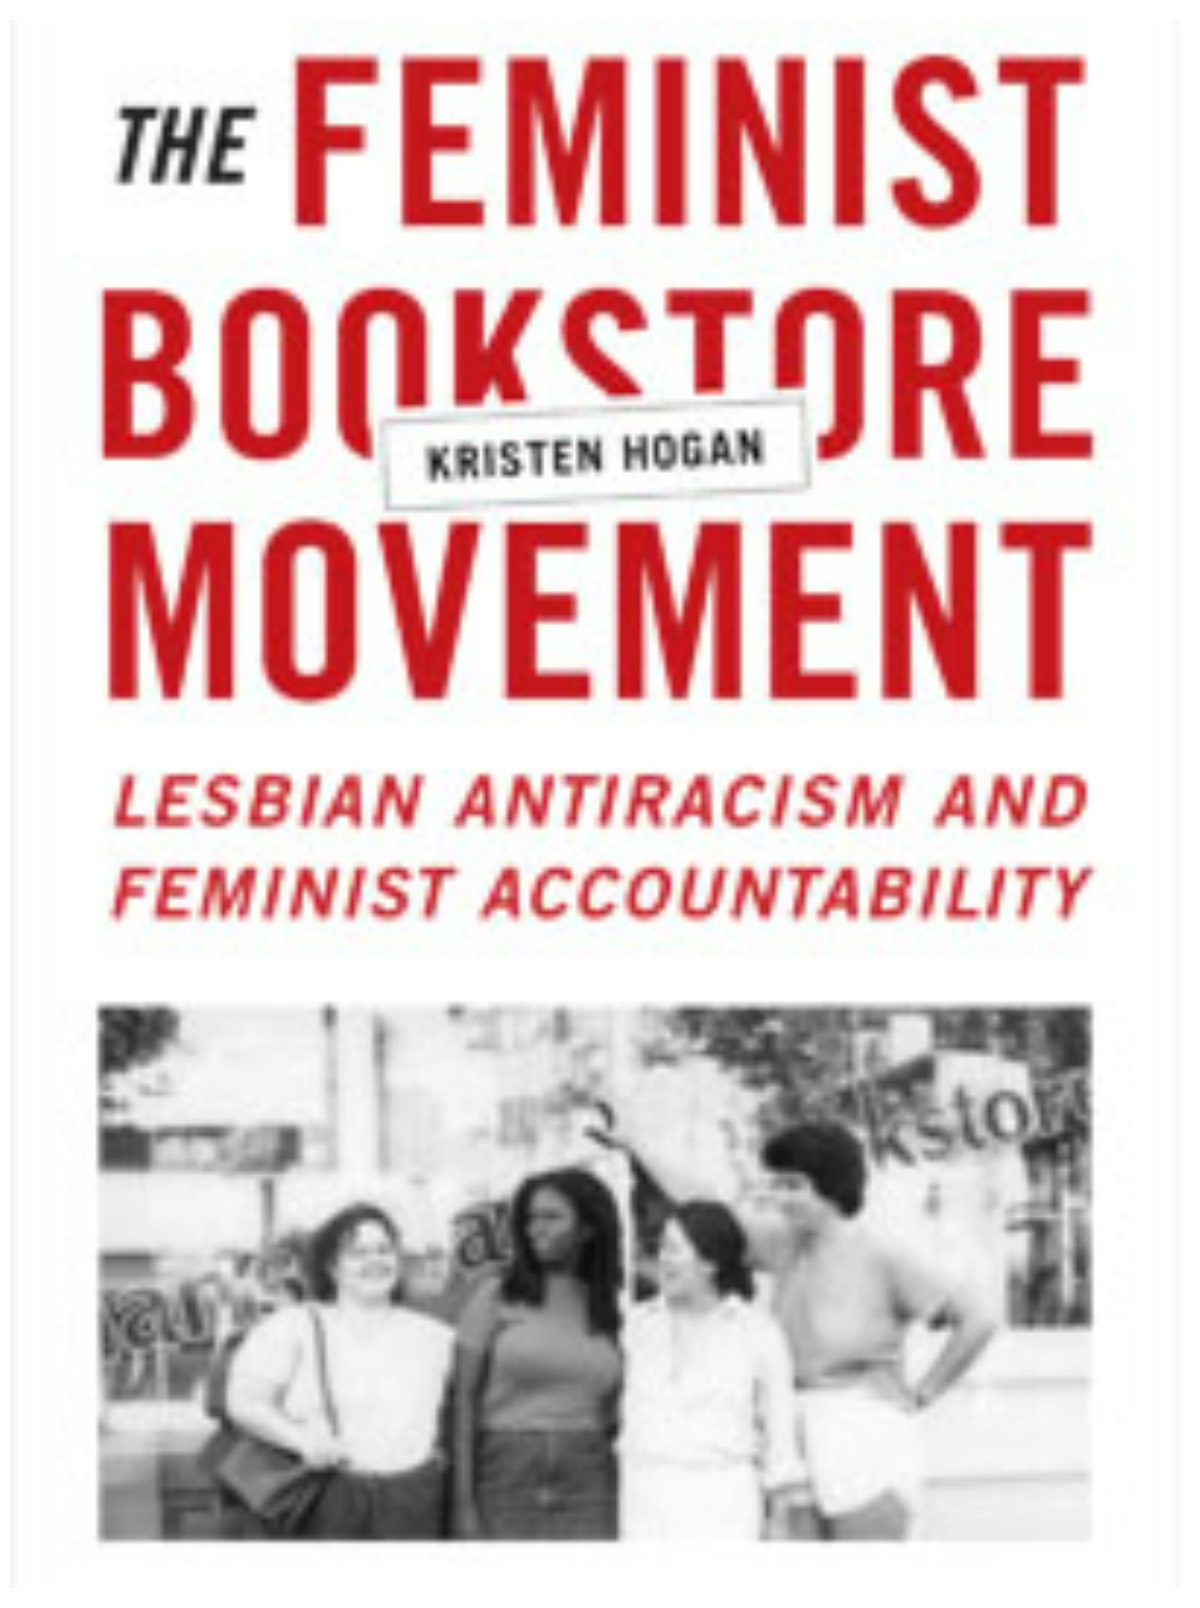 The Feminist Bookstore Movement: Lesbian Antiracism and Feminist Accountability.	